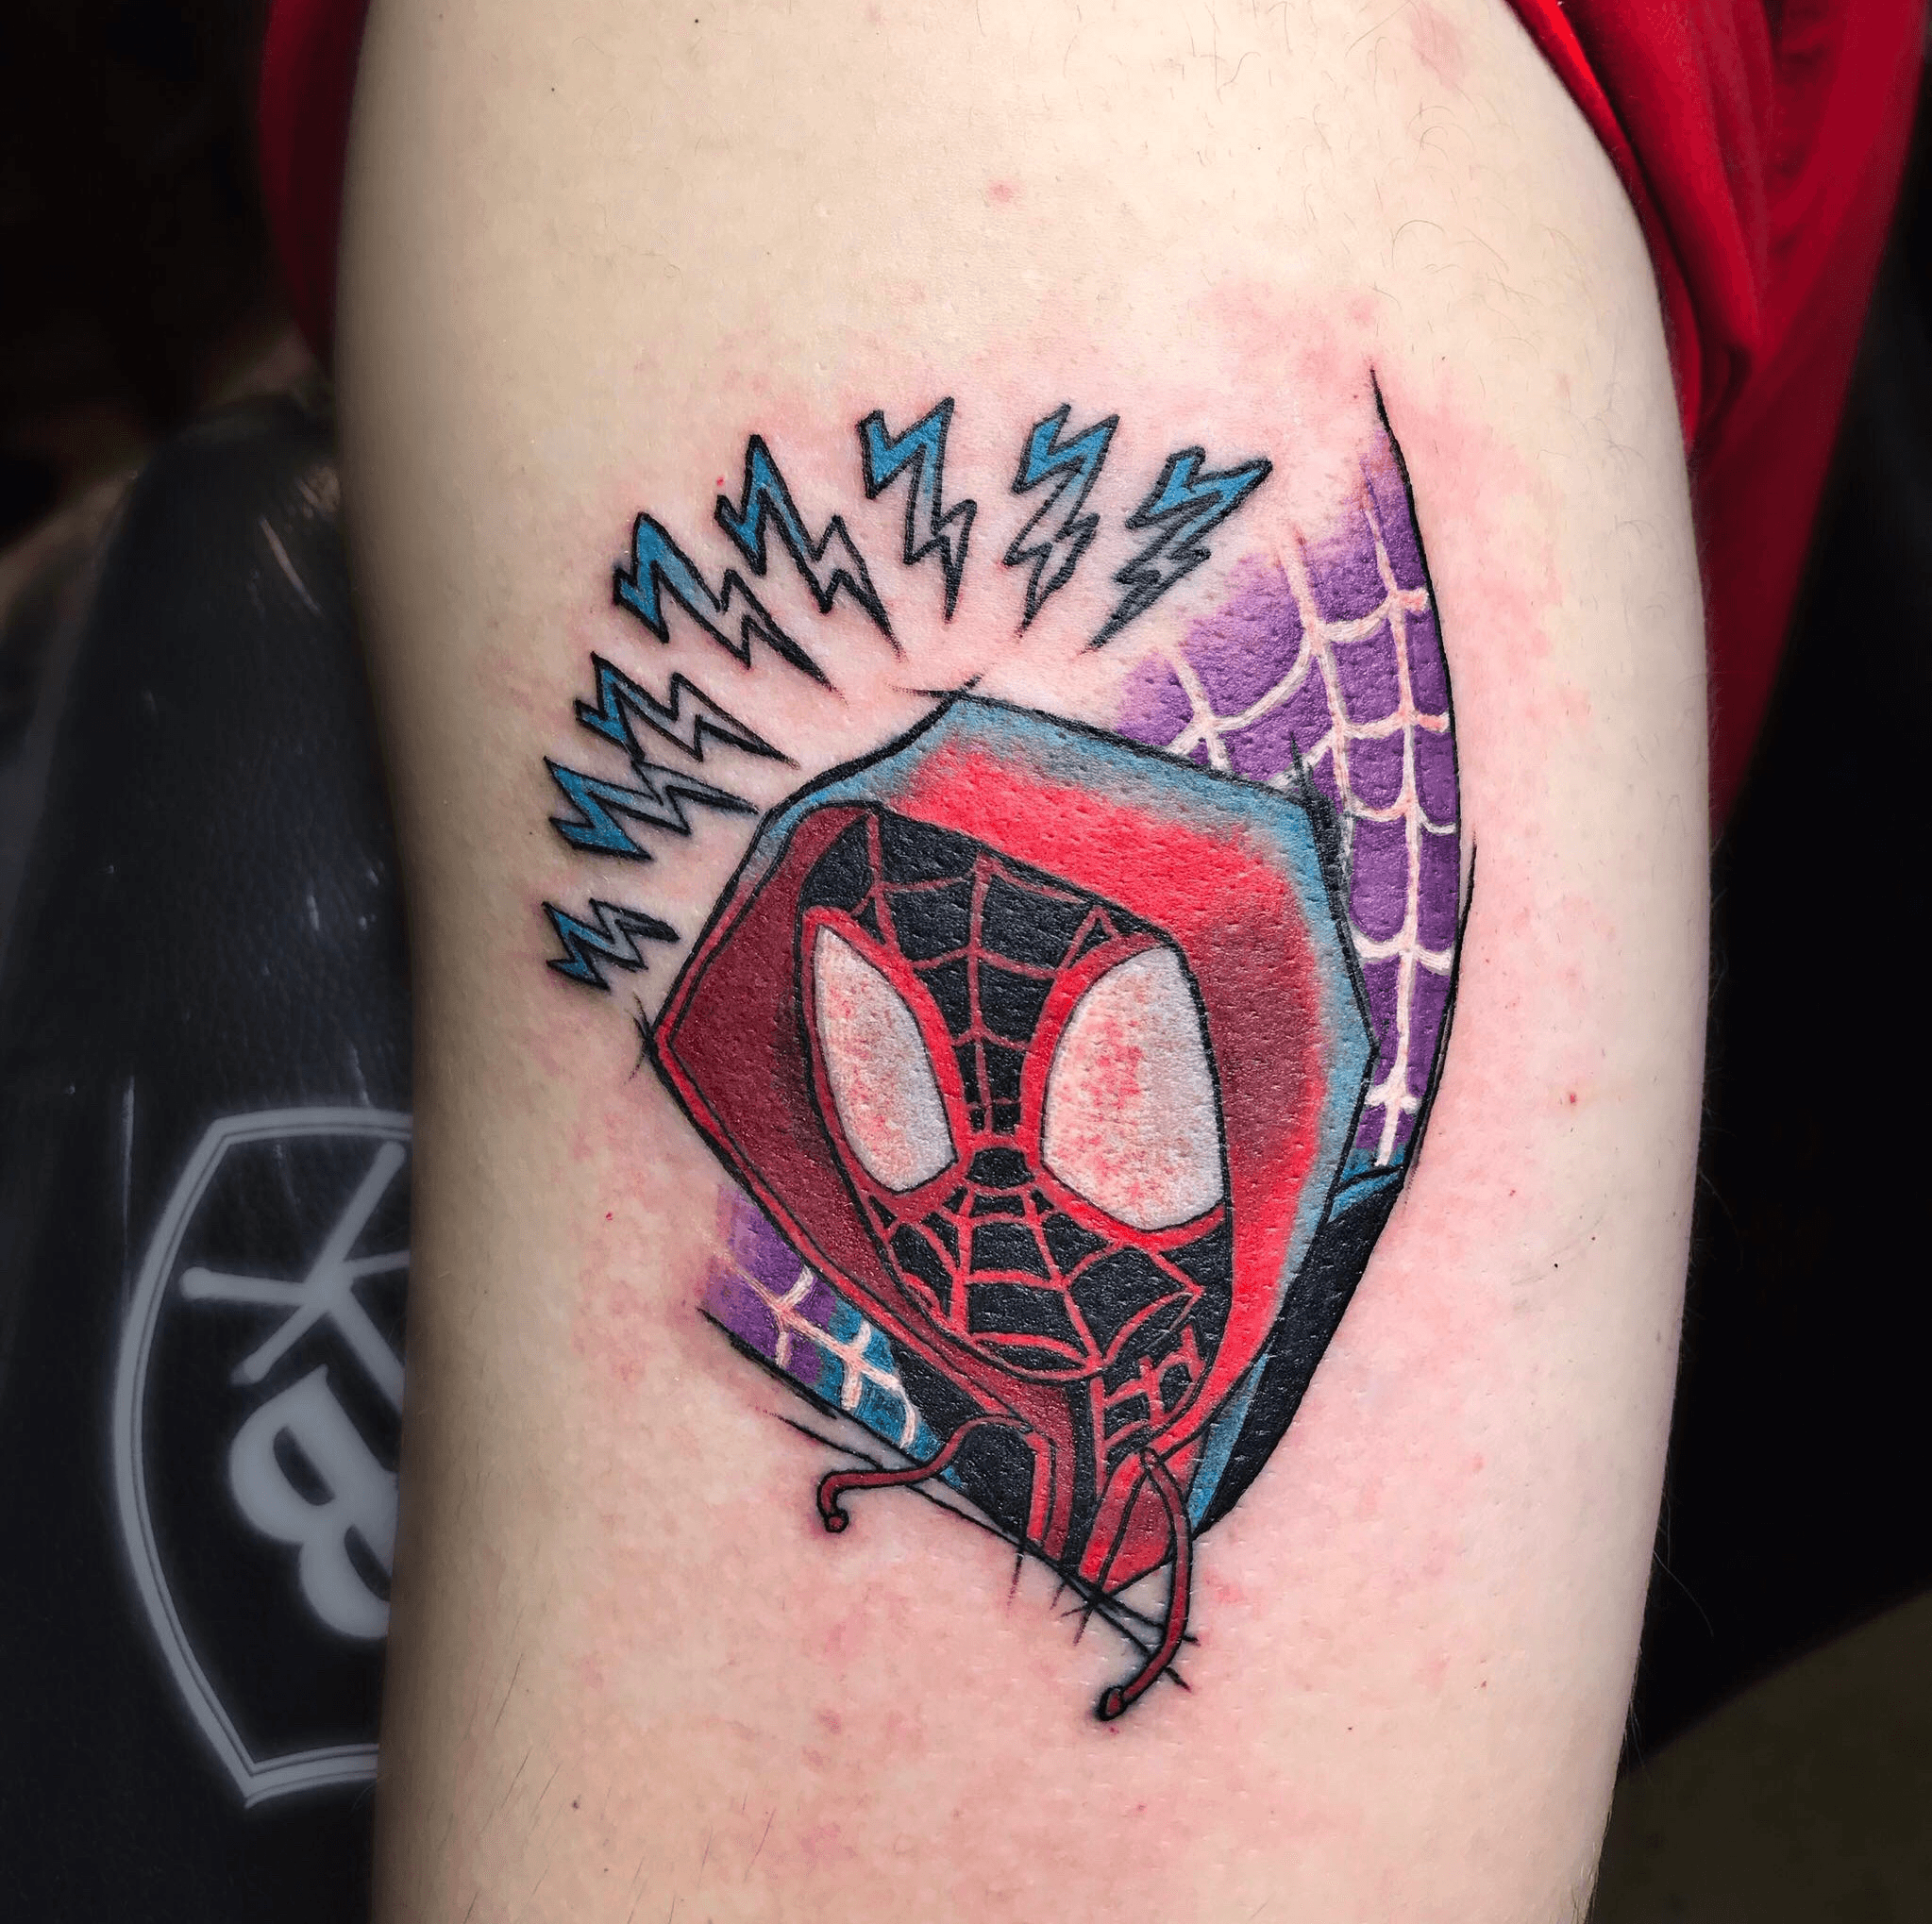 Miles Morales tattoo located on the thigh